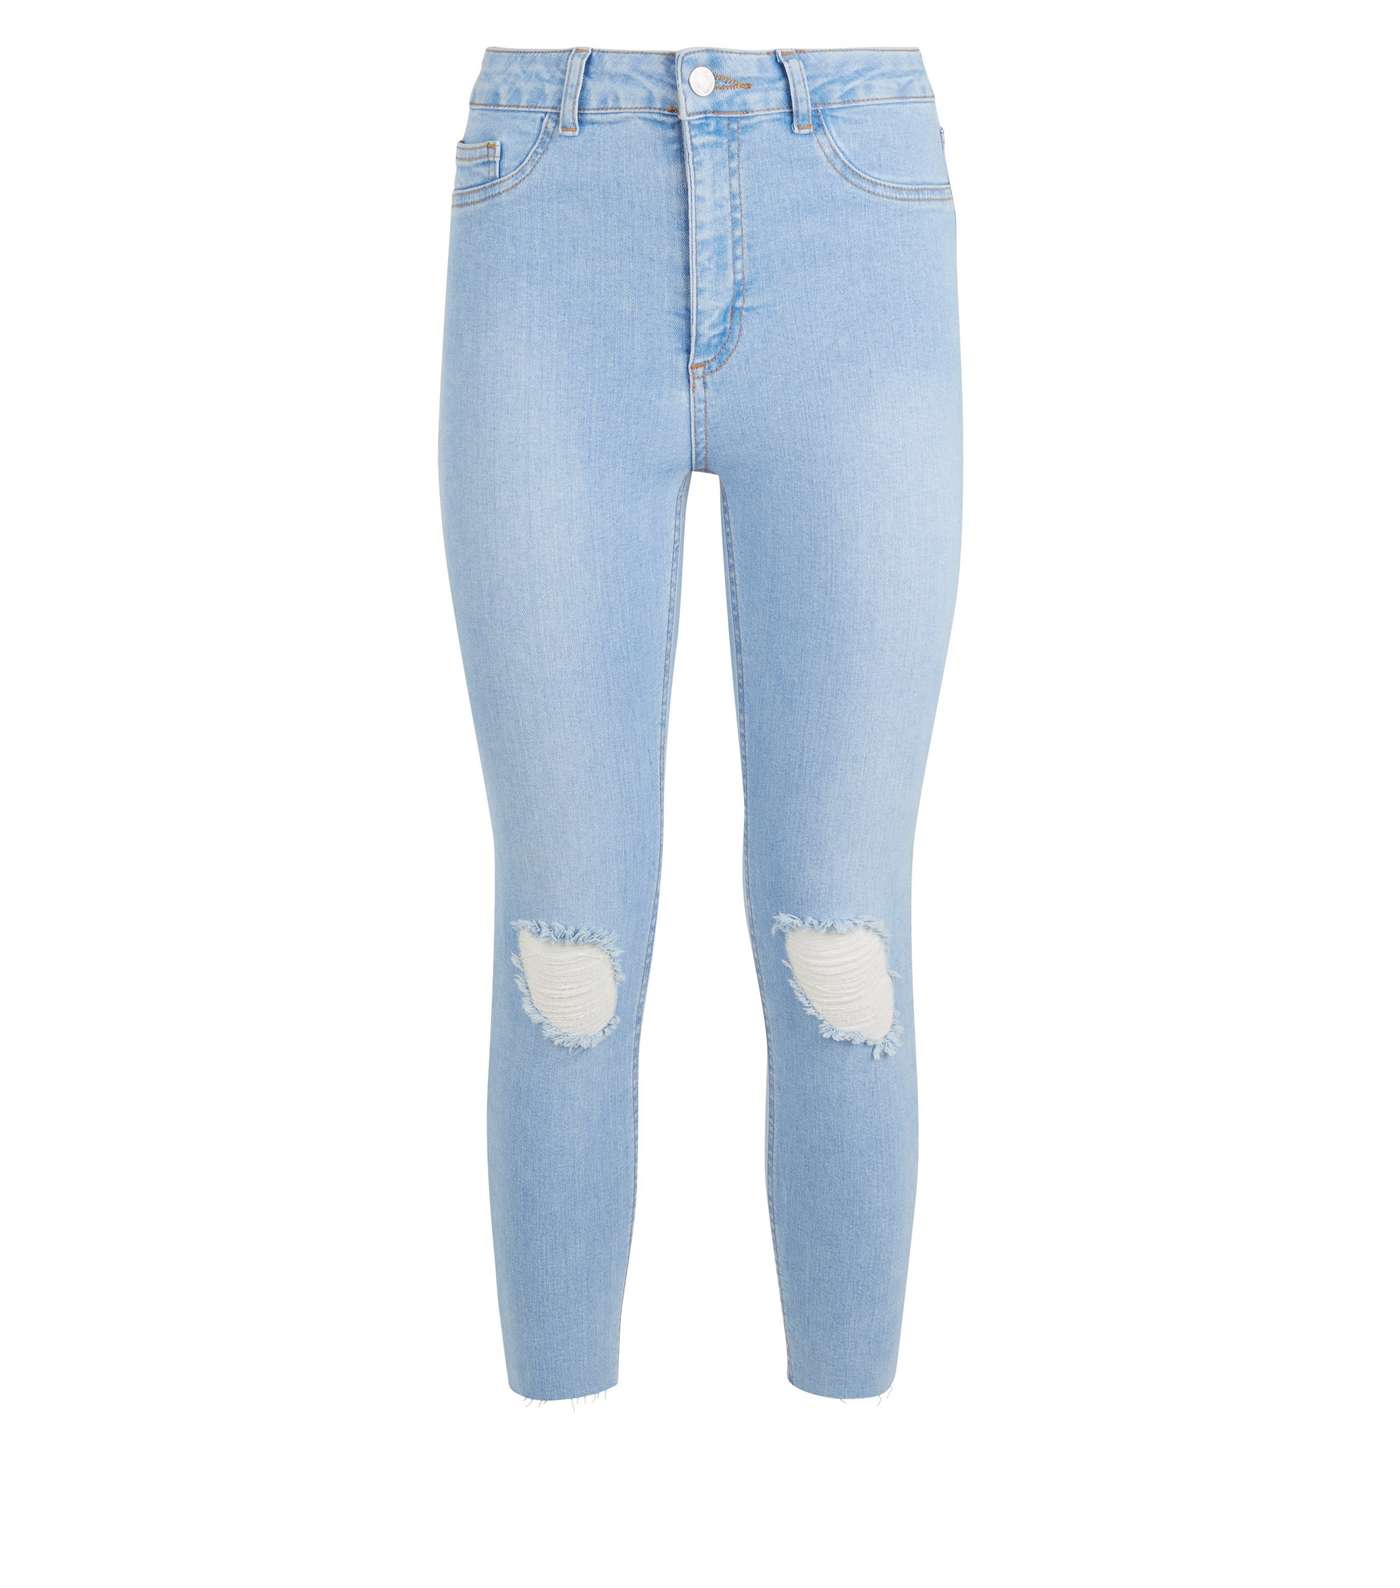 Petite Bright Blue Ripped Skinny Jeans  Image 4